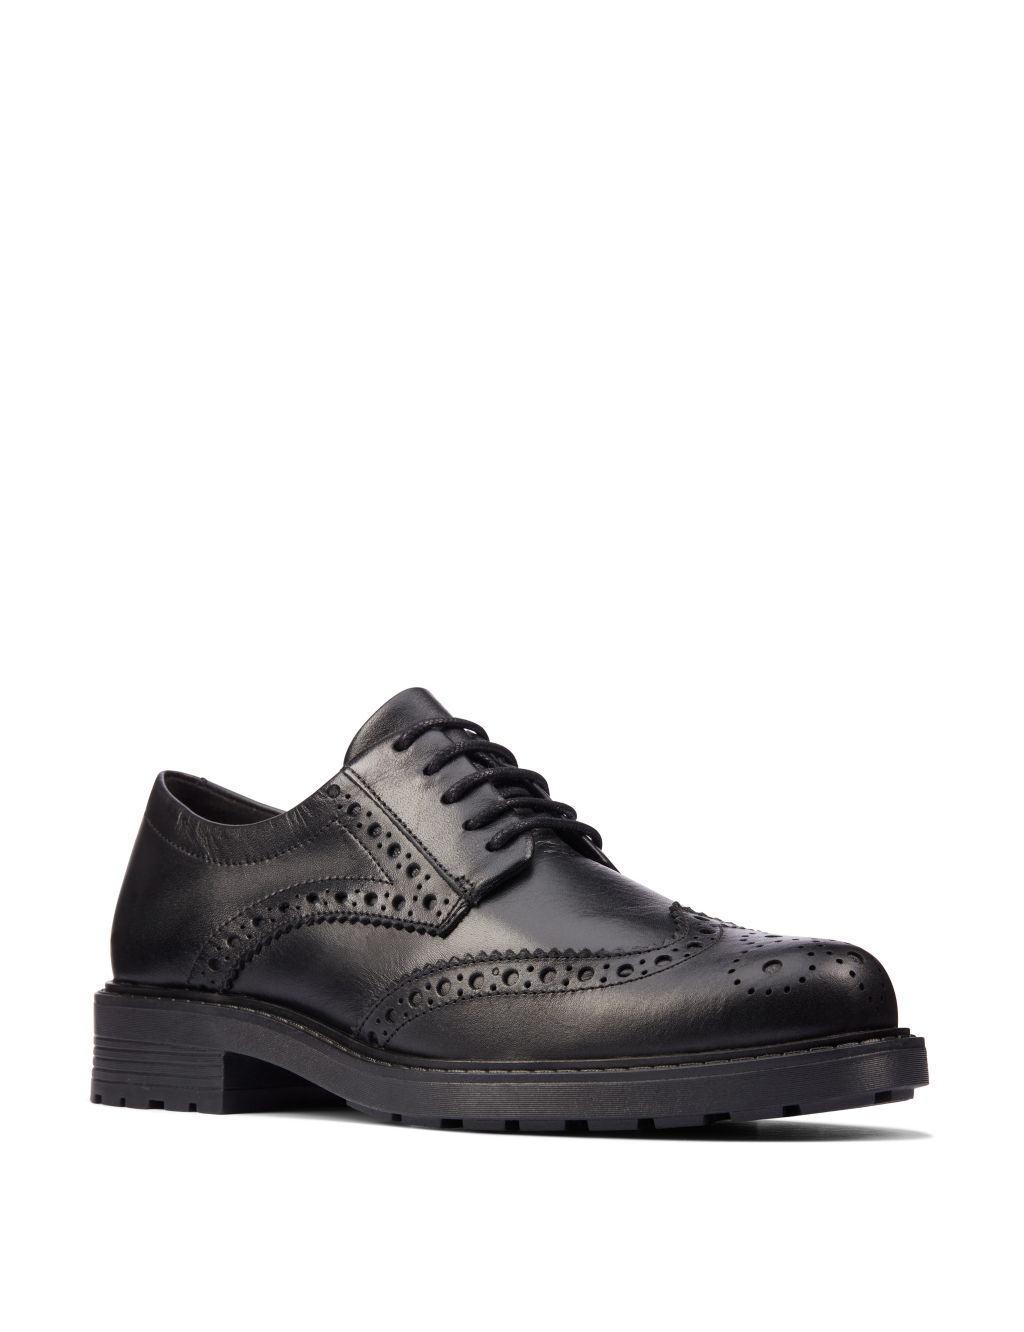 Leather Lace Up Brogues | CLARKS | M&S